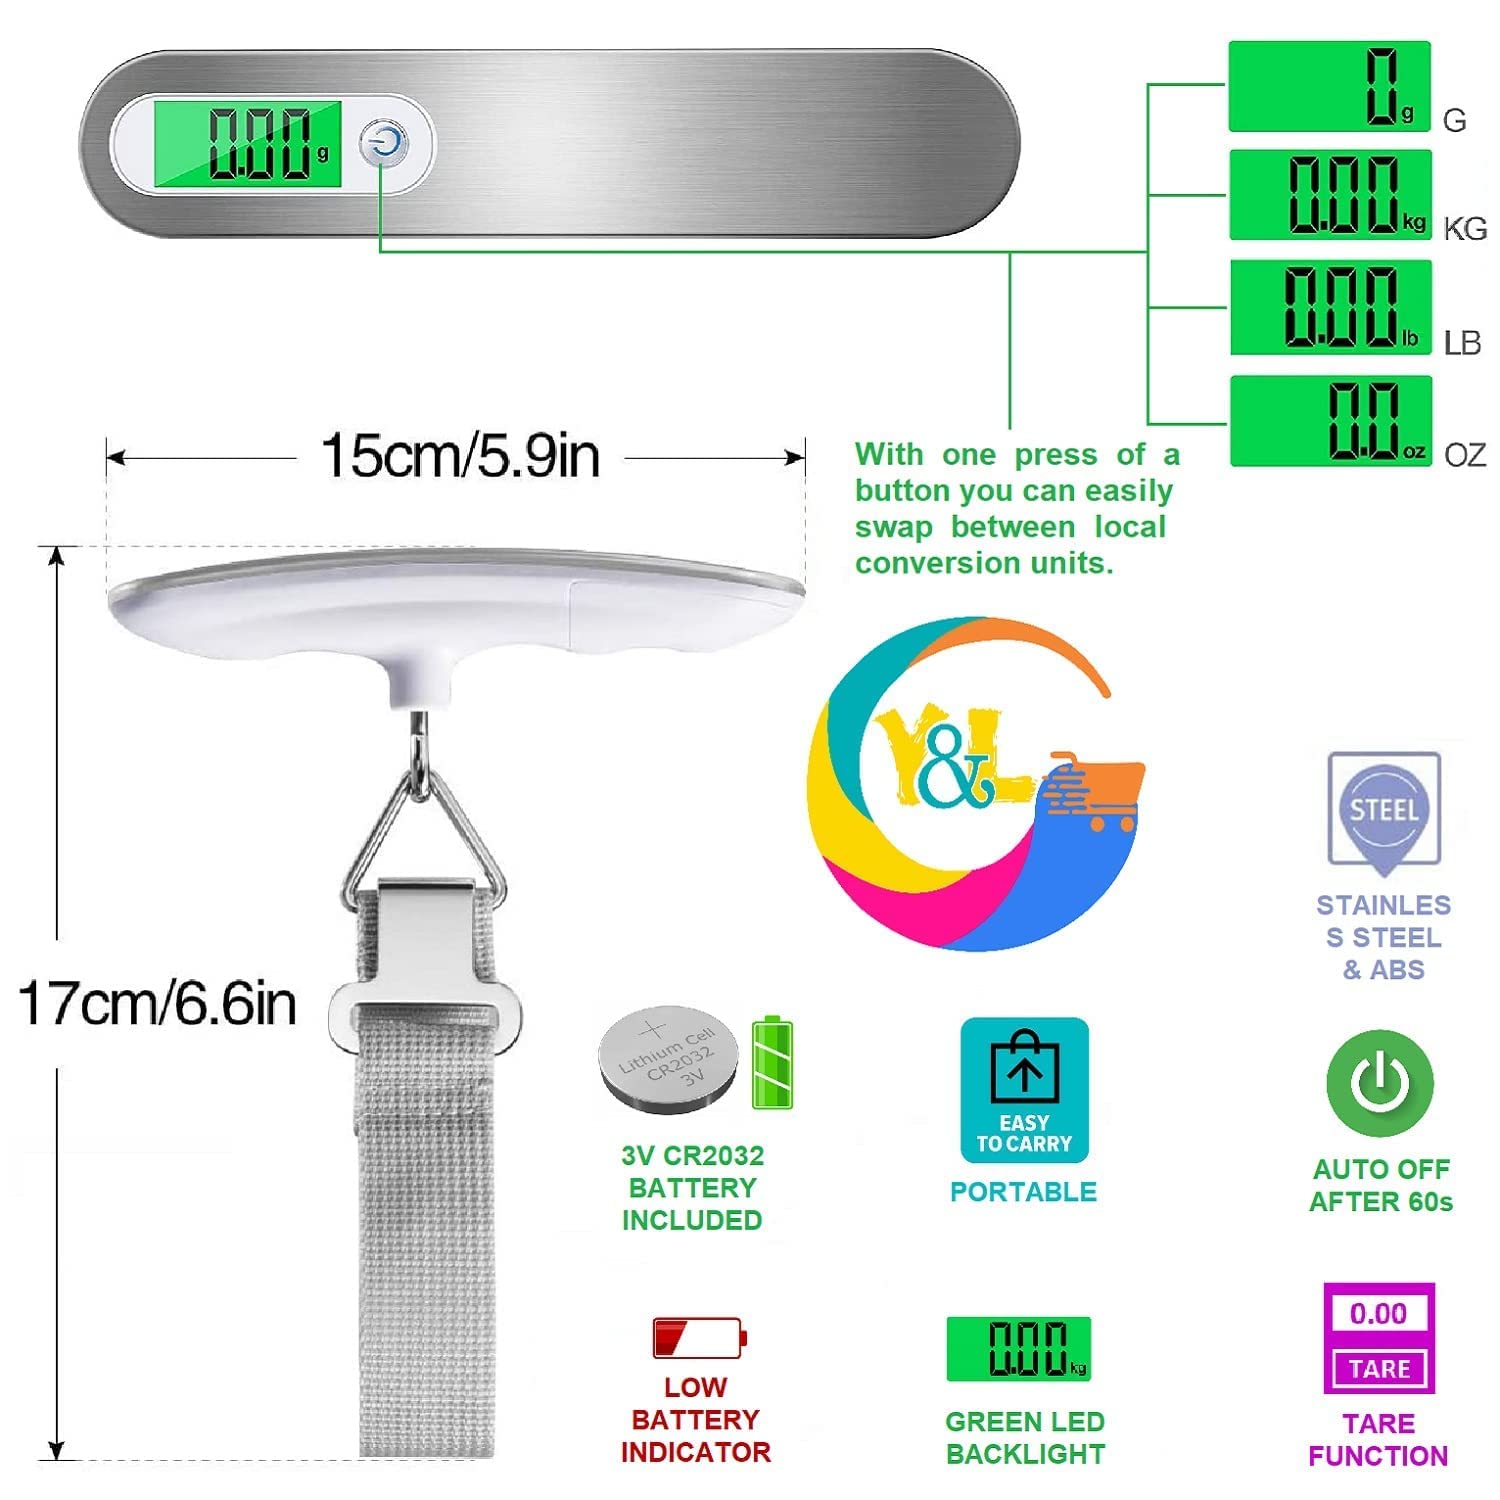 Digital Portable Hanging T shaped Weighing Scale For Luggage | Luggage Weight Machine Zaappy